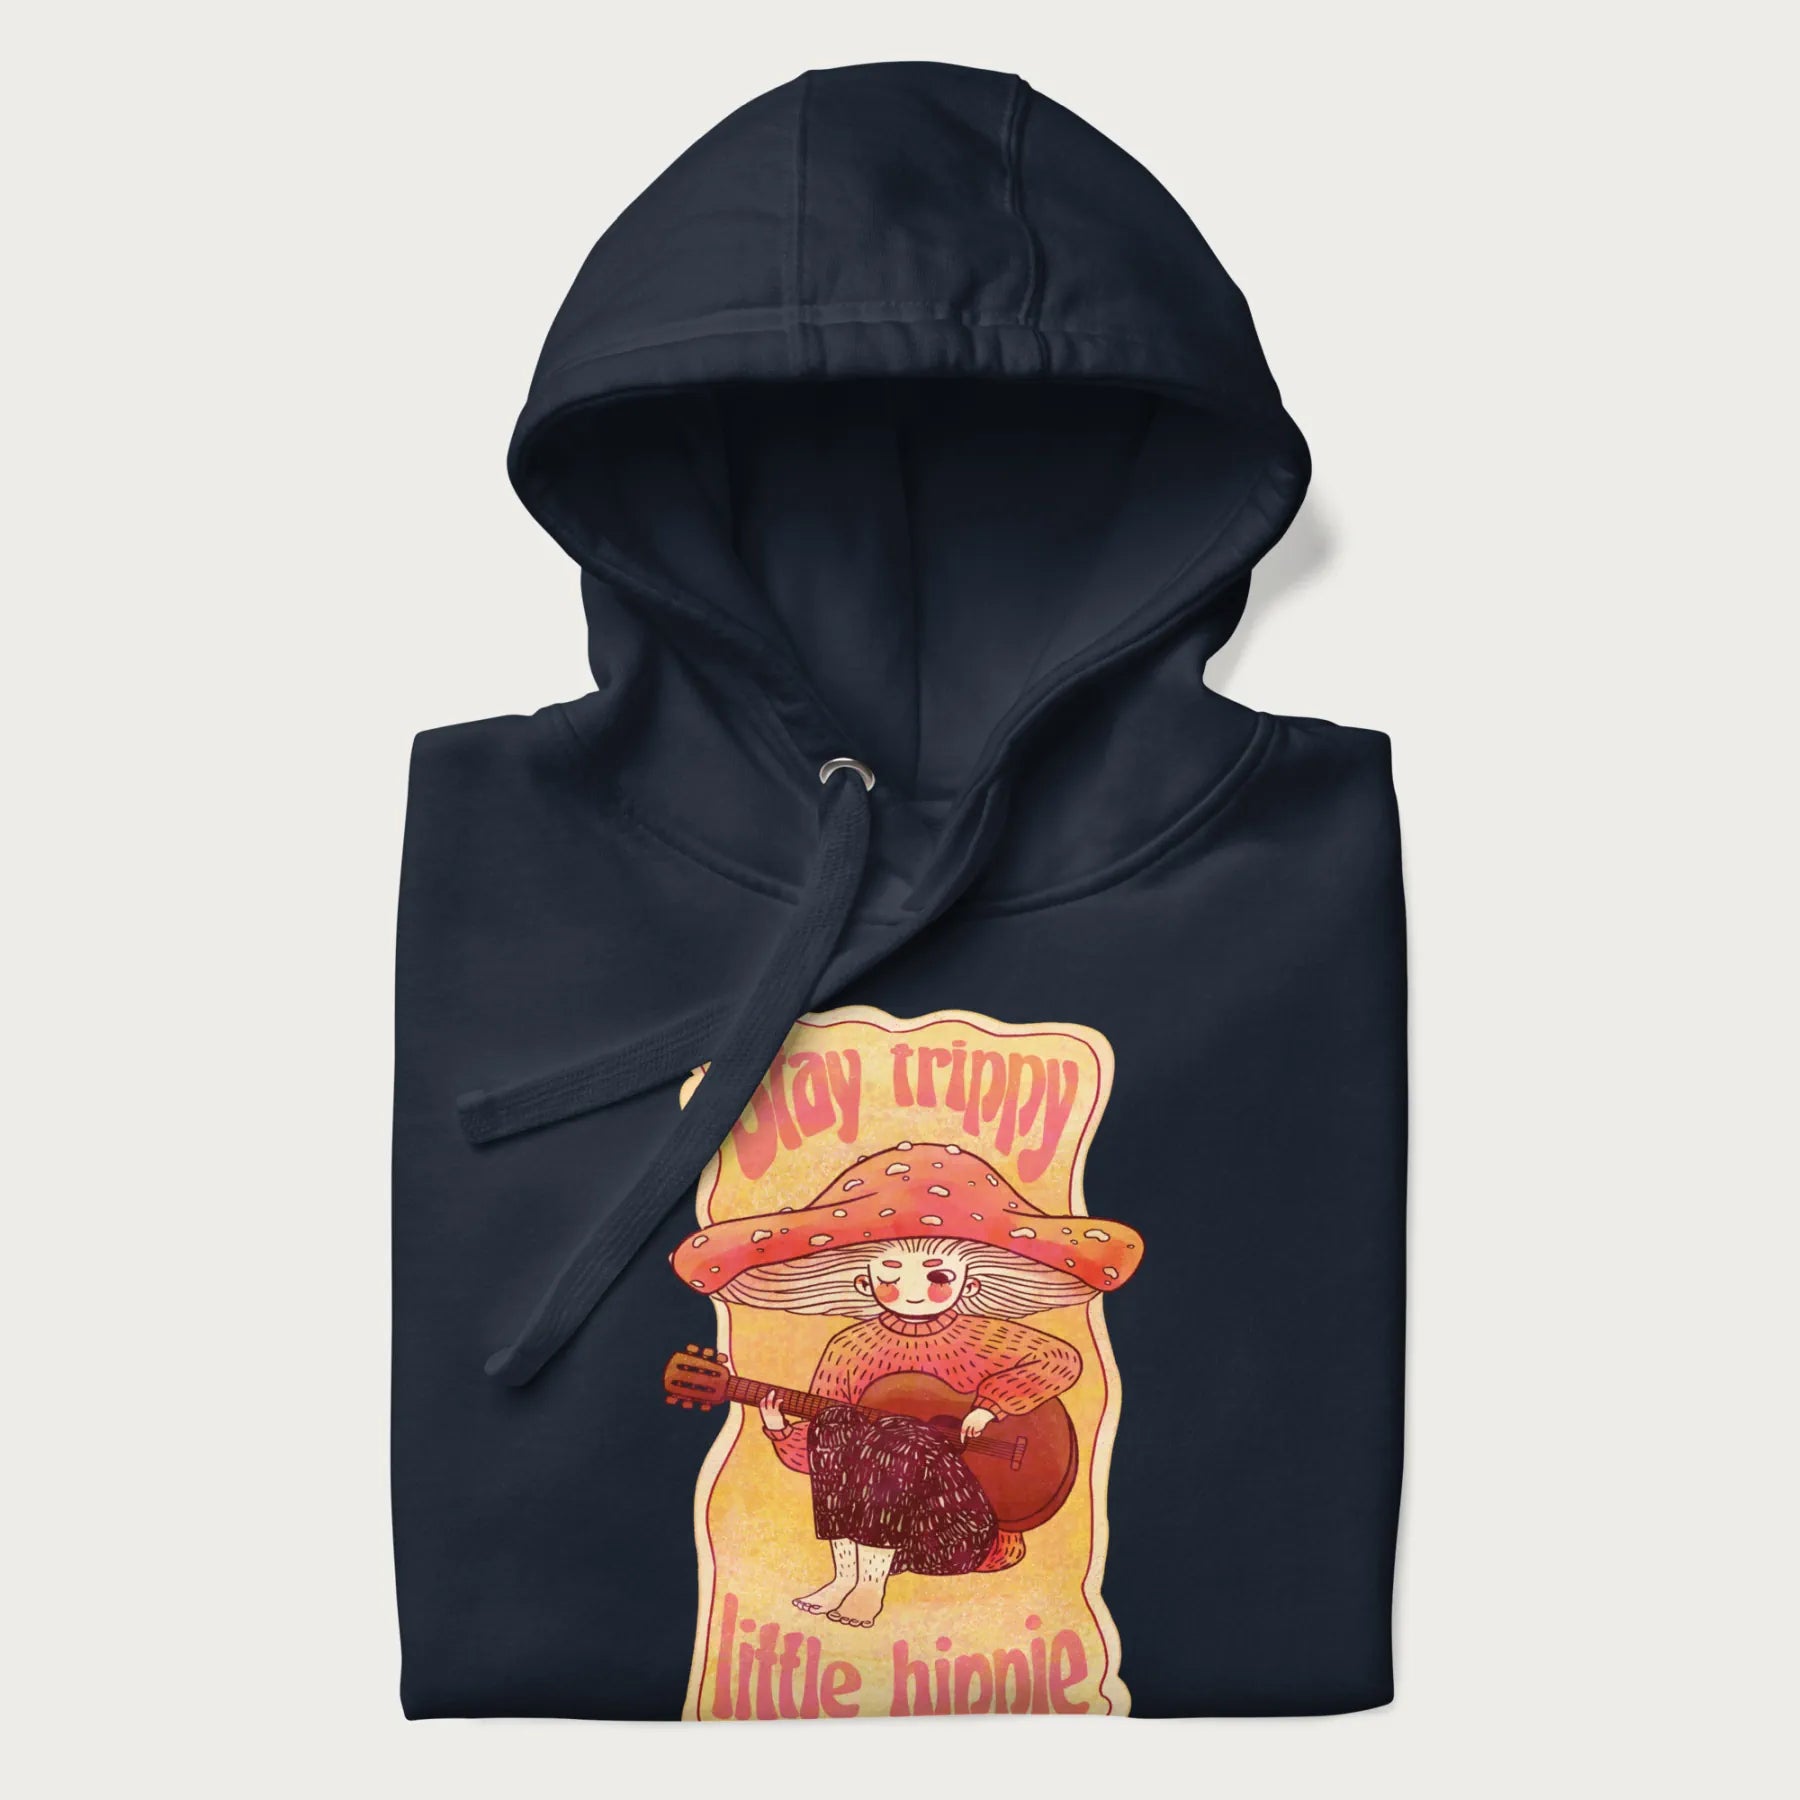 Folded navy blue hoodie with a graphic of a character with a mushroom cap playing a guitar and the text 'Stay Trippy Little Hippie.'